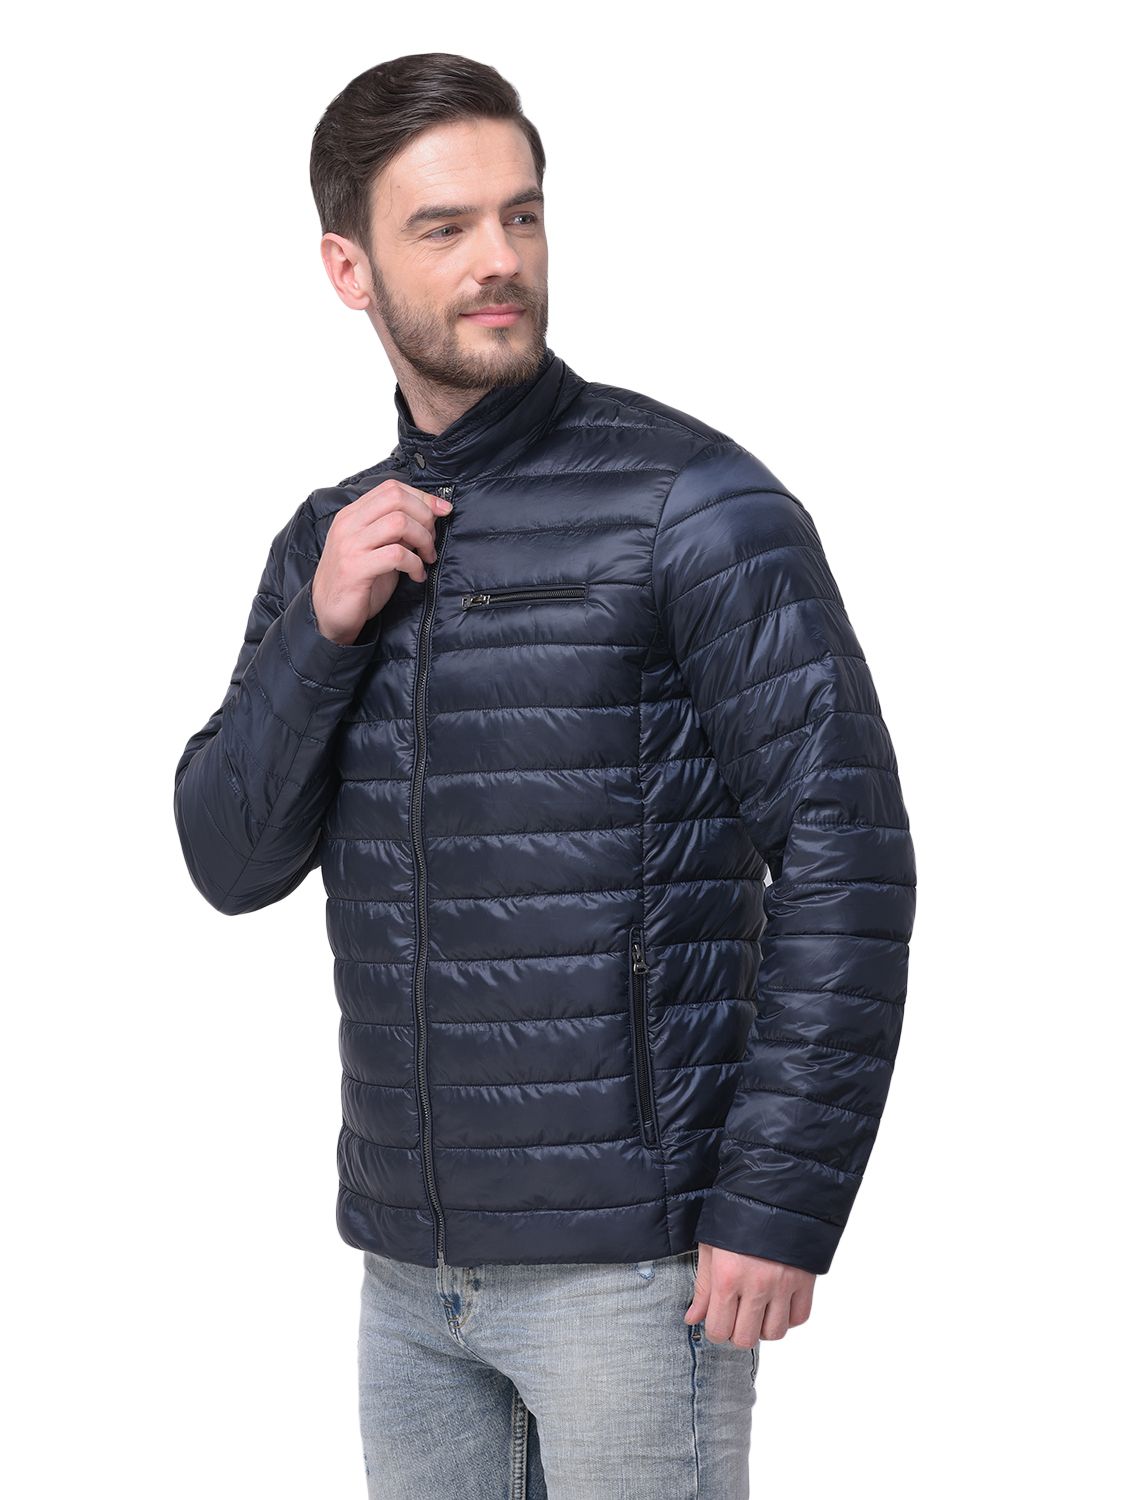 Navy quilted jacket